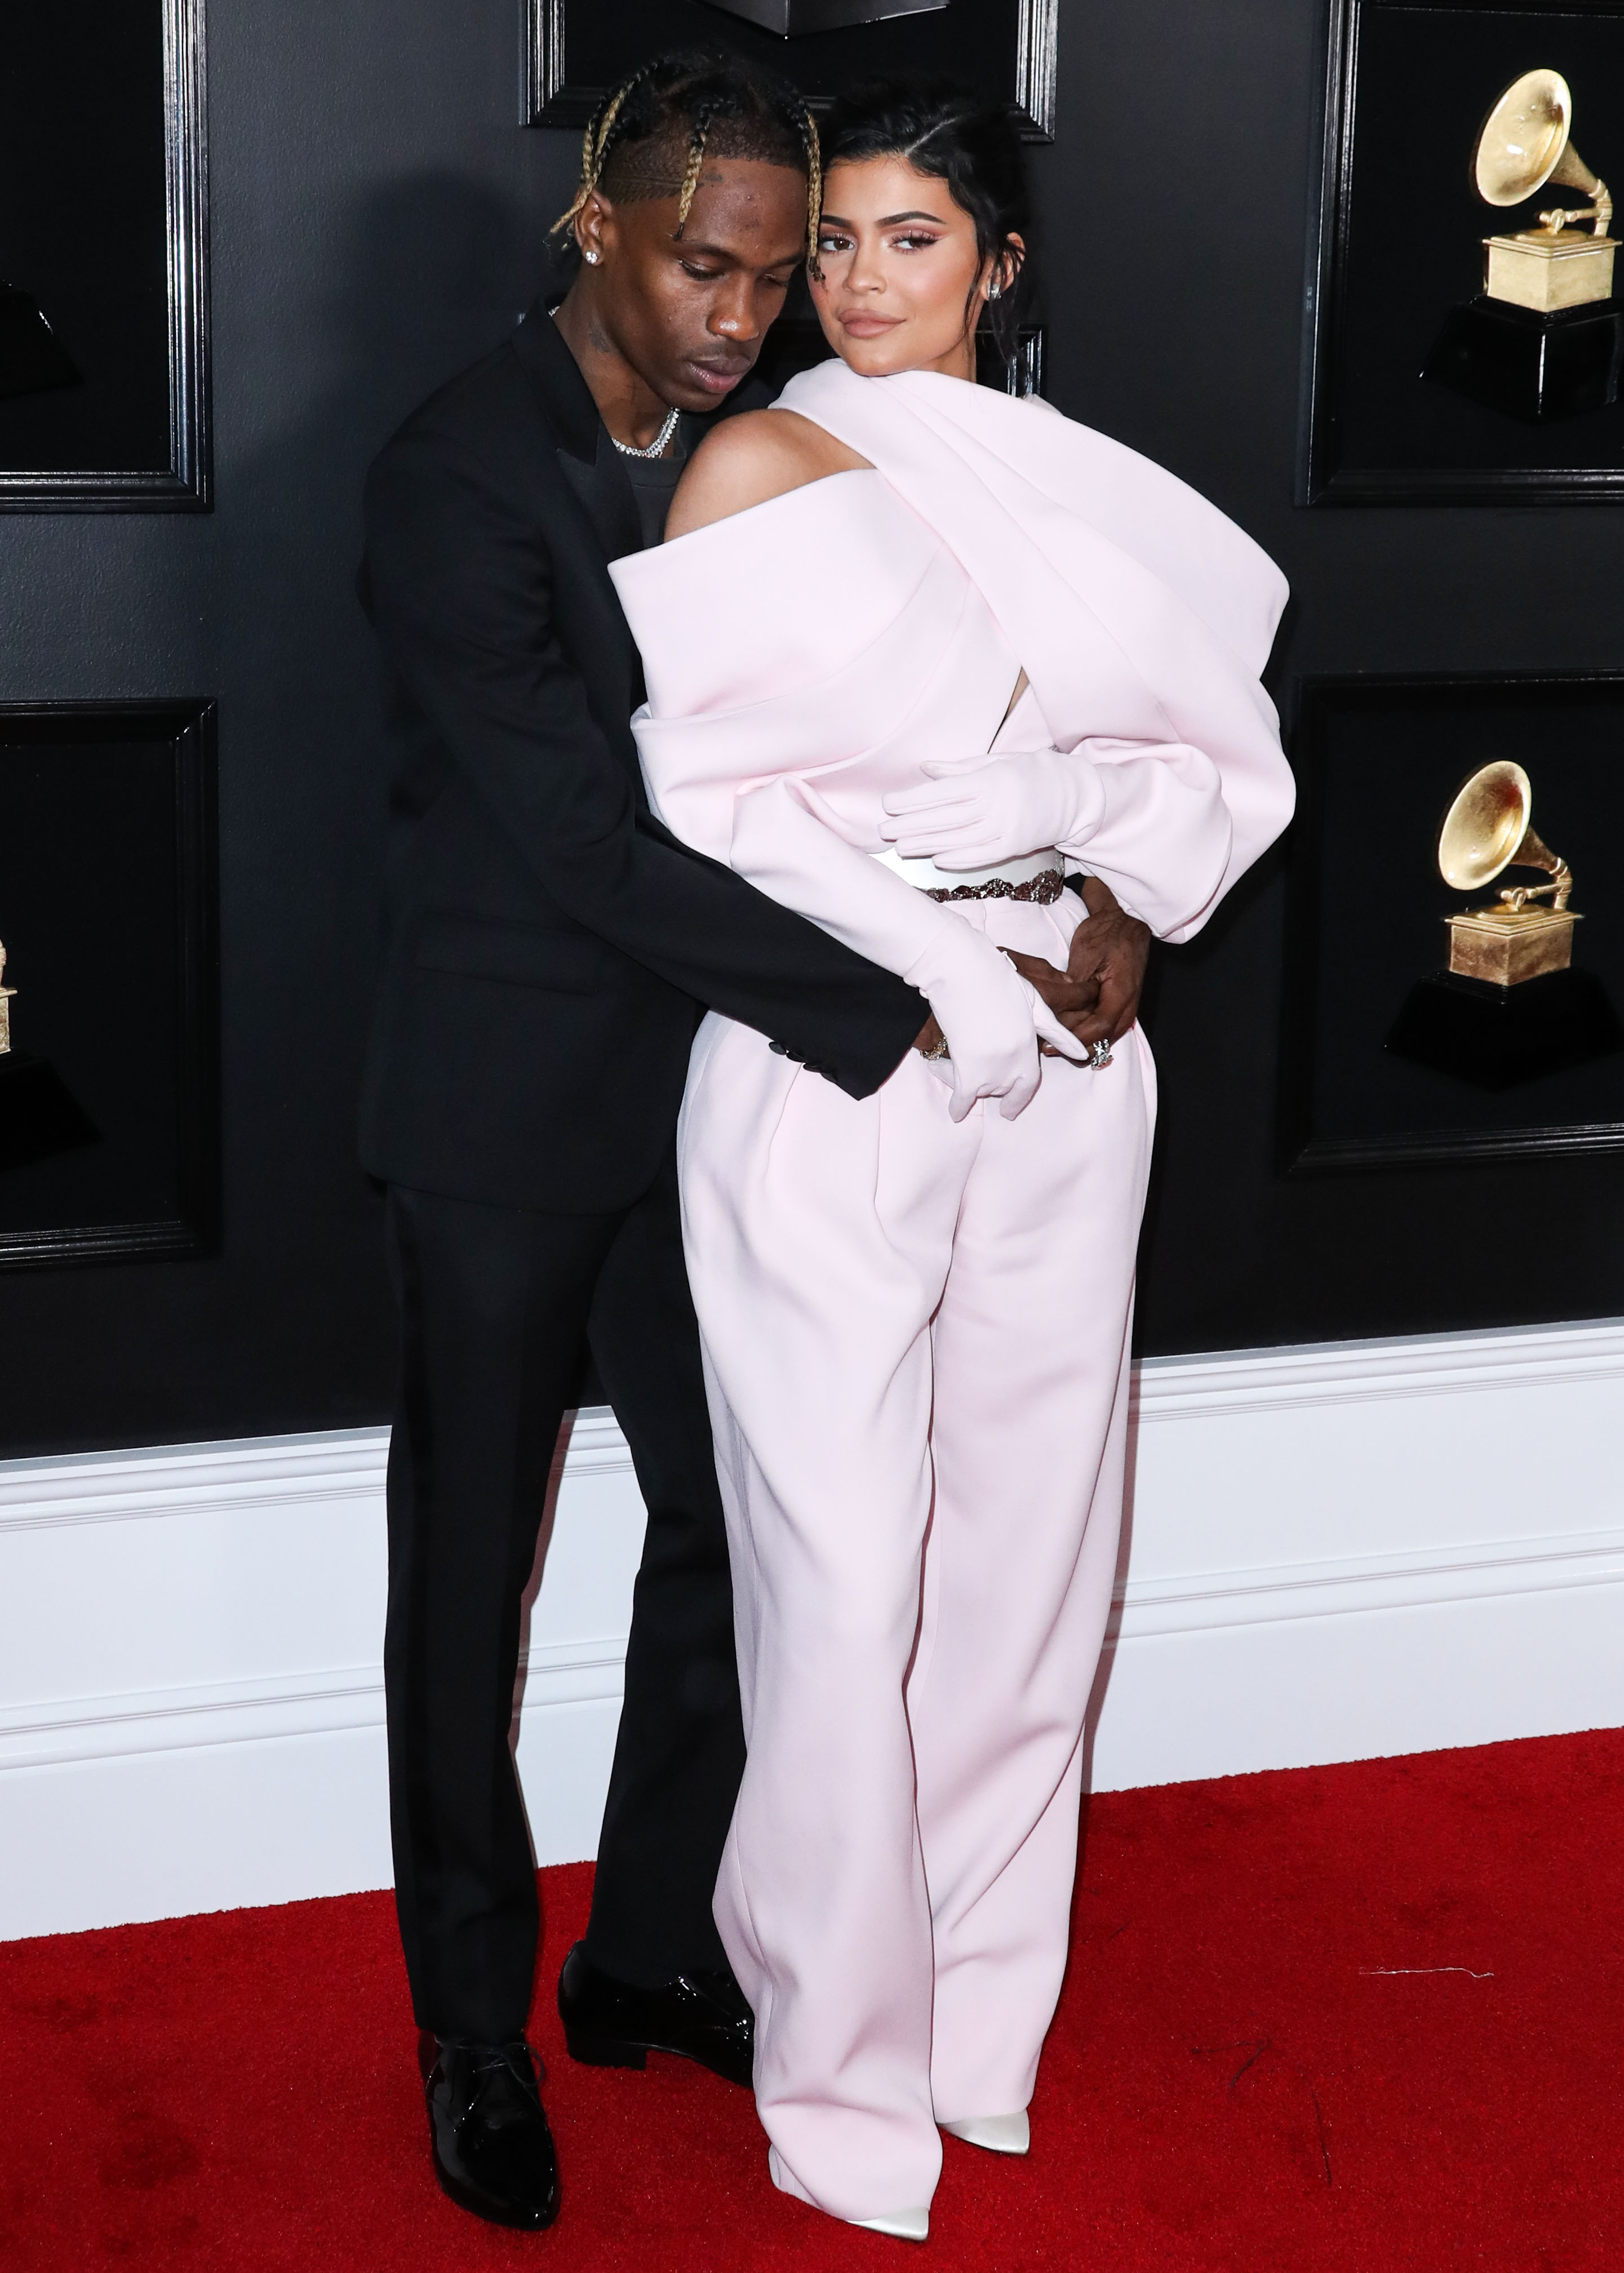 Kylie Jenner and Travis Scott at the Grammy's